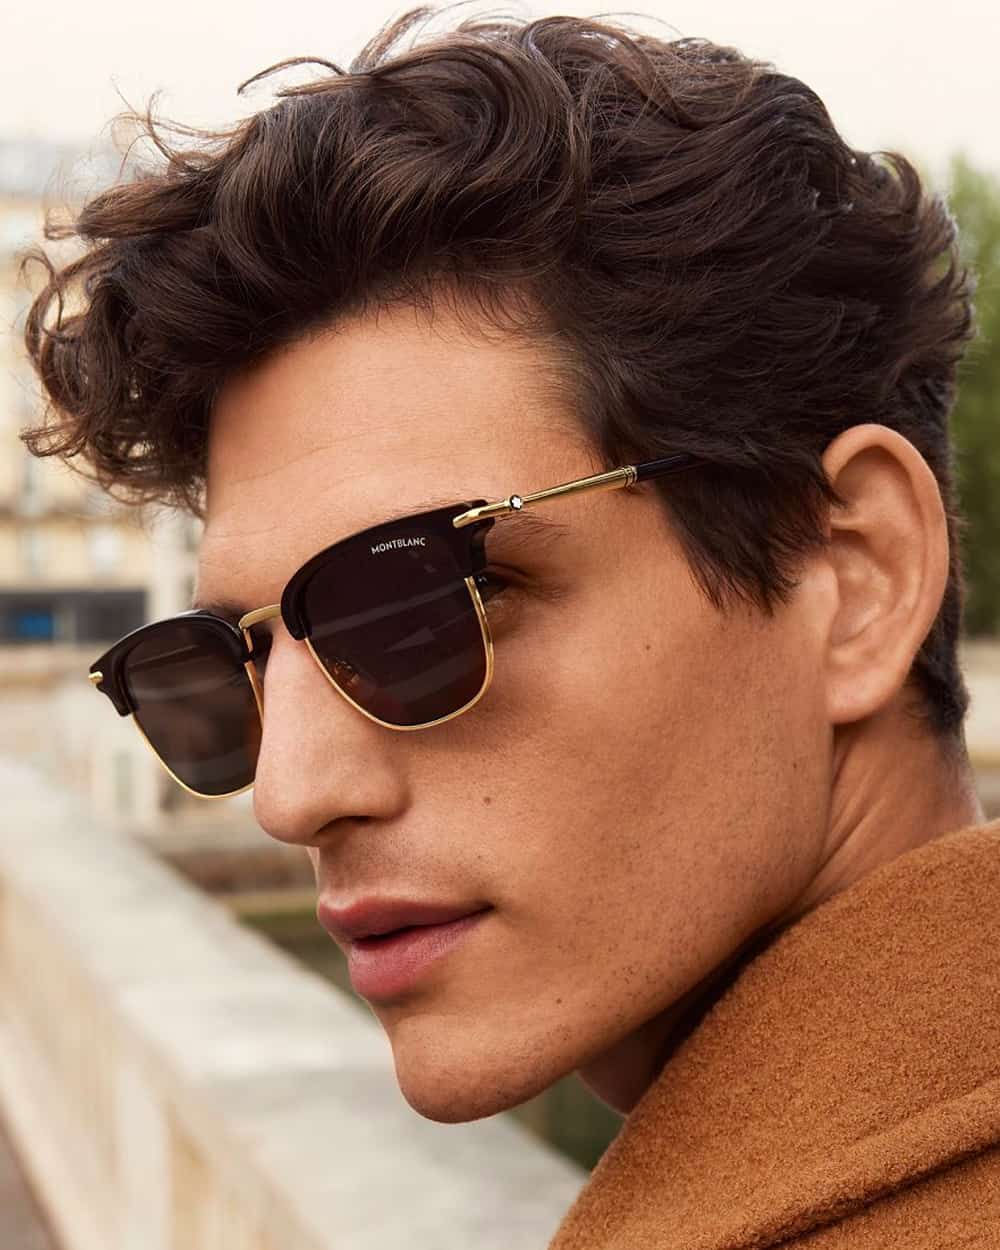 Man wearing Montblanc gold frame and black lens sunglasses